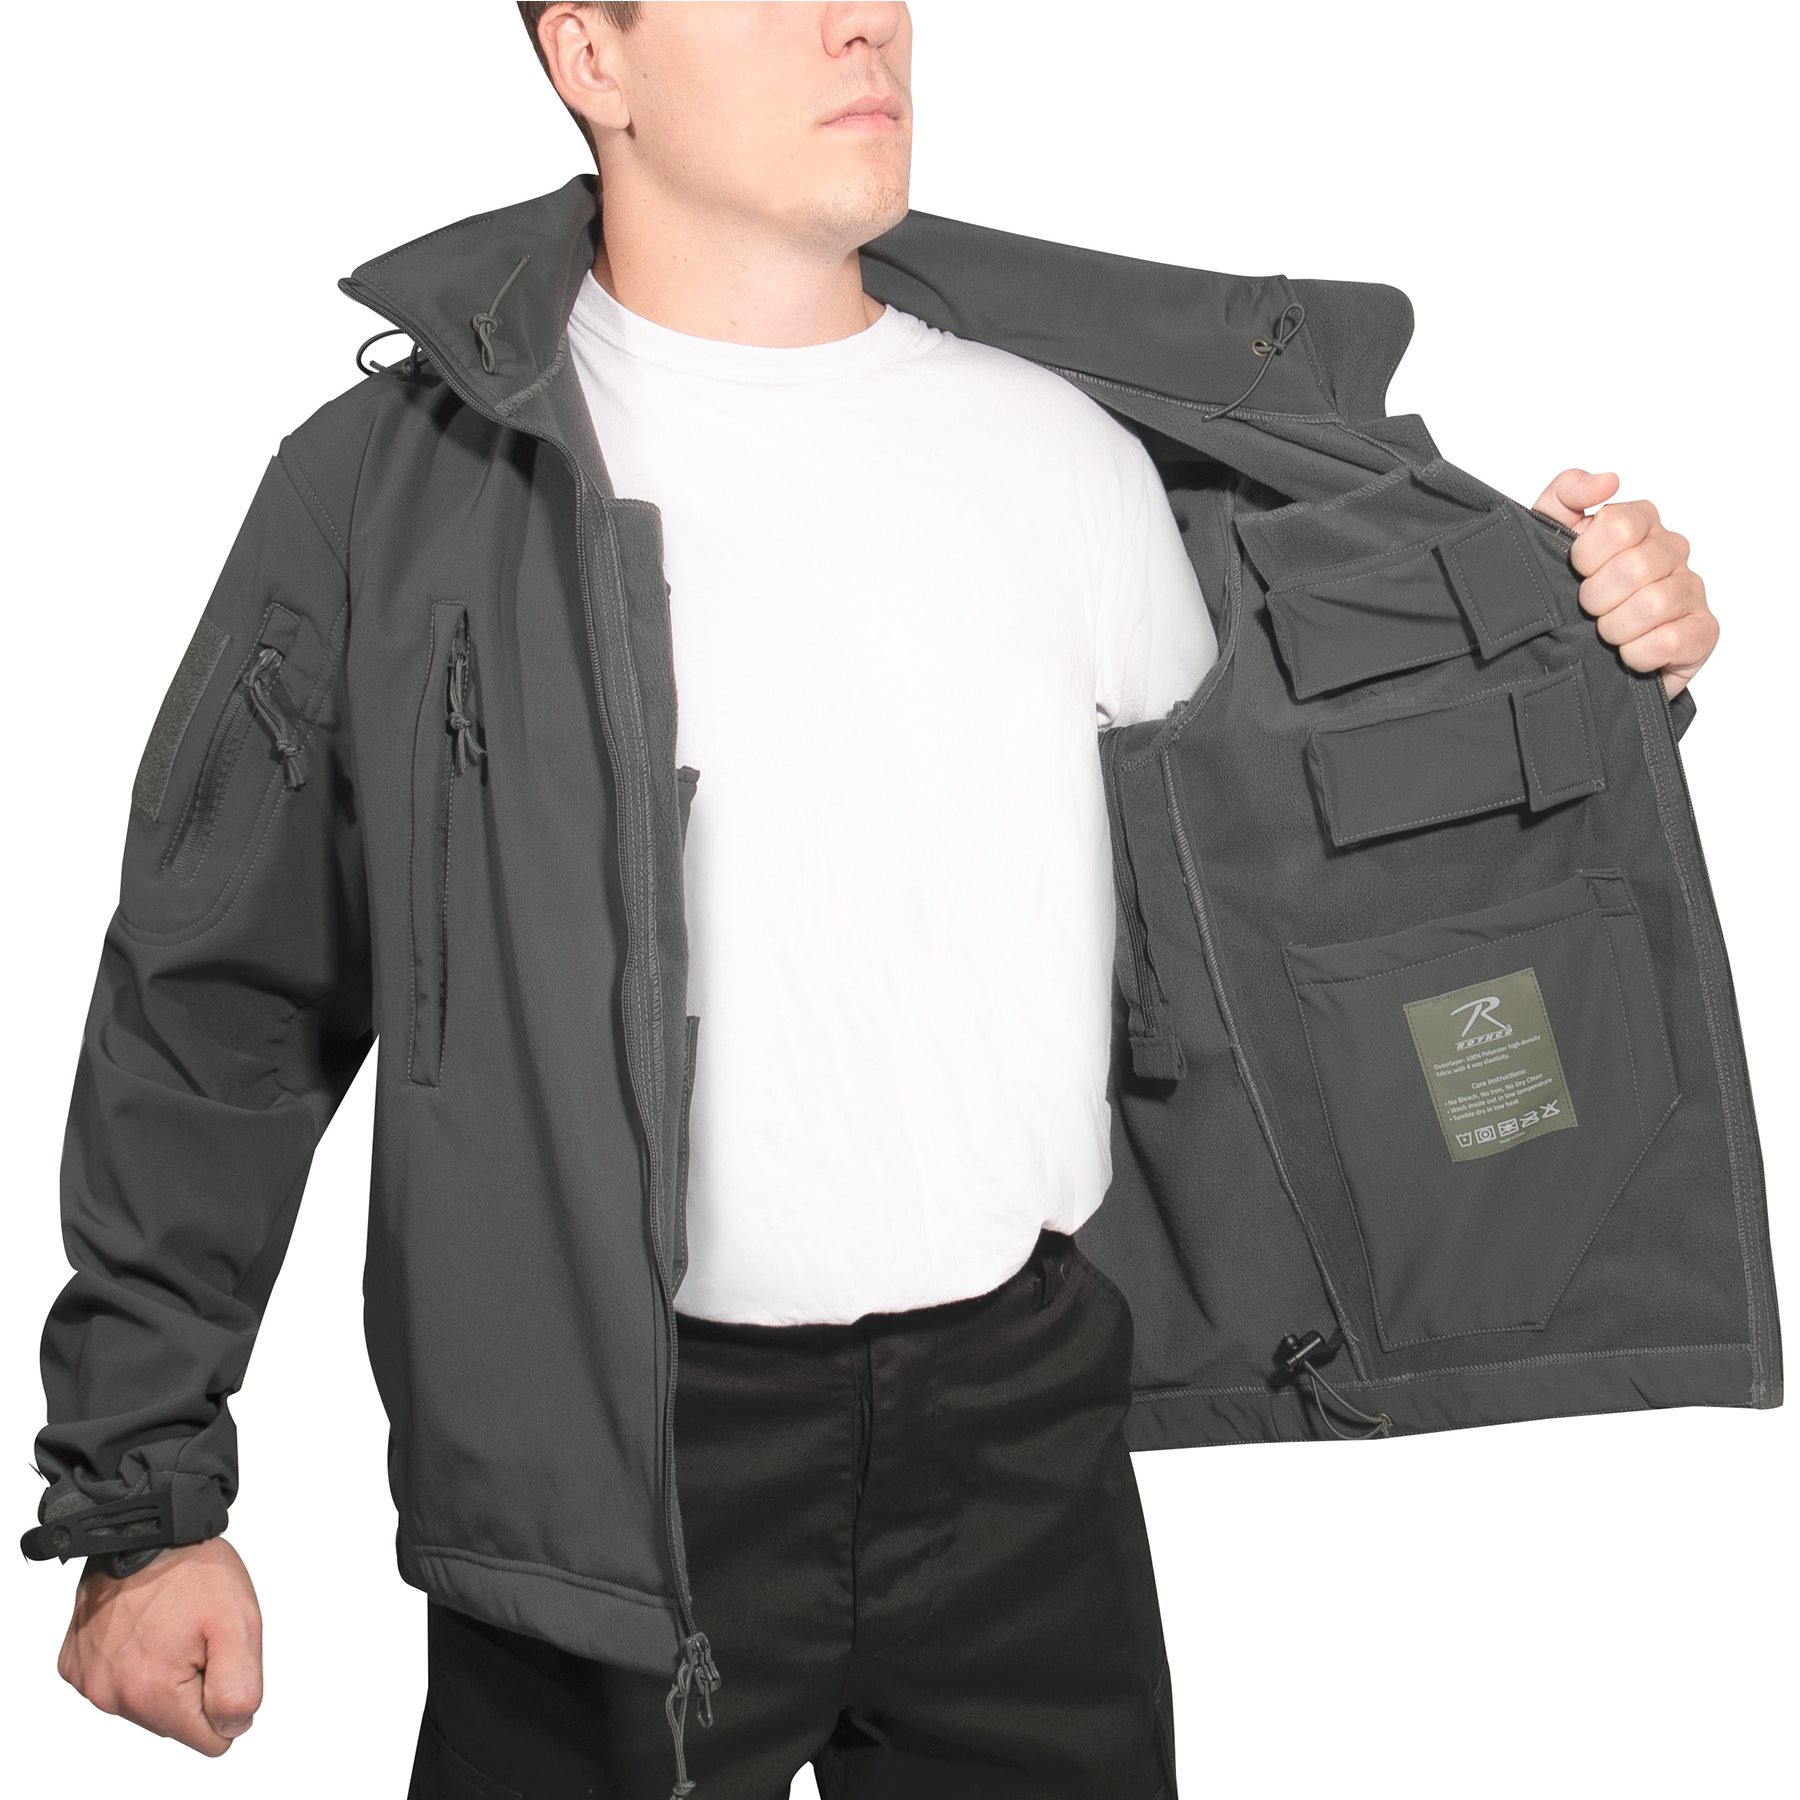 Concealed Carry Soft Shell Jacket GUNMETAL GREY ROTHCO 55785 L-11